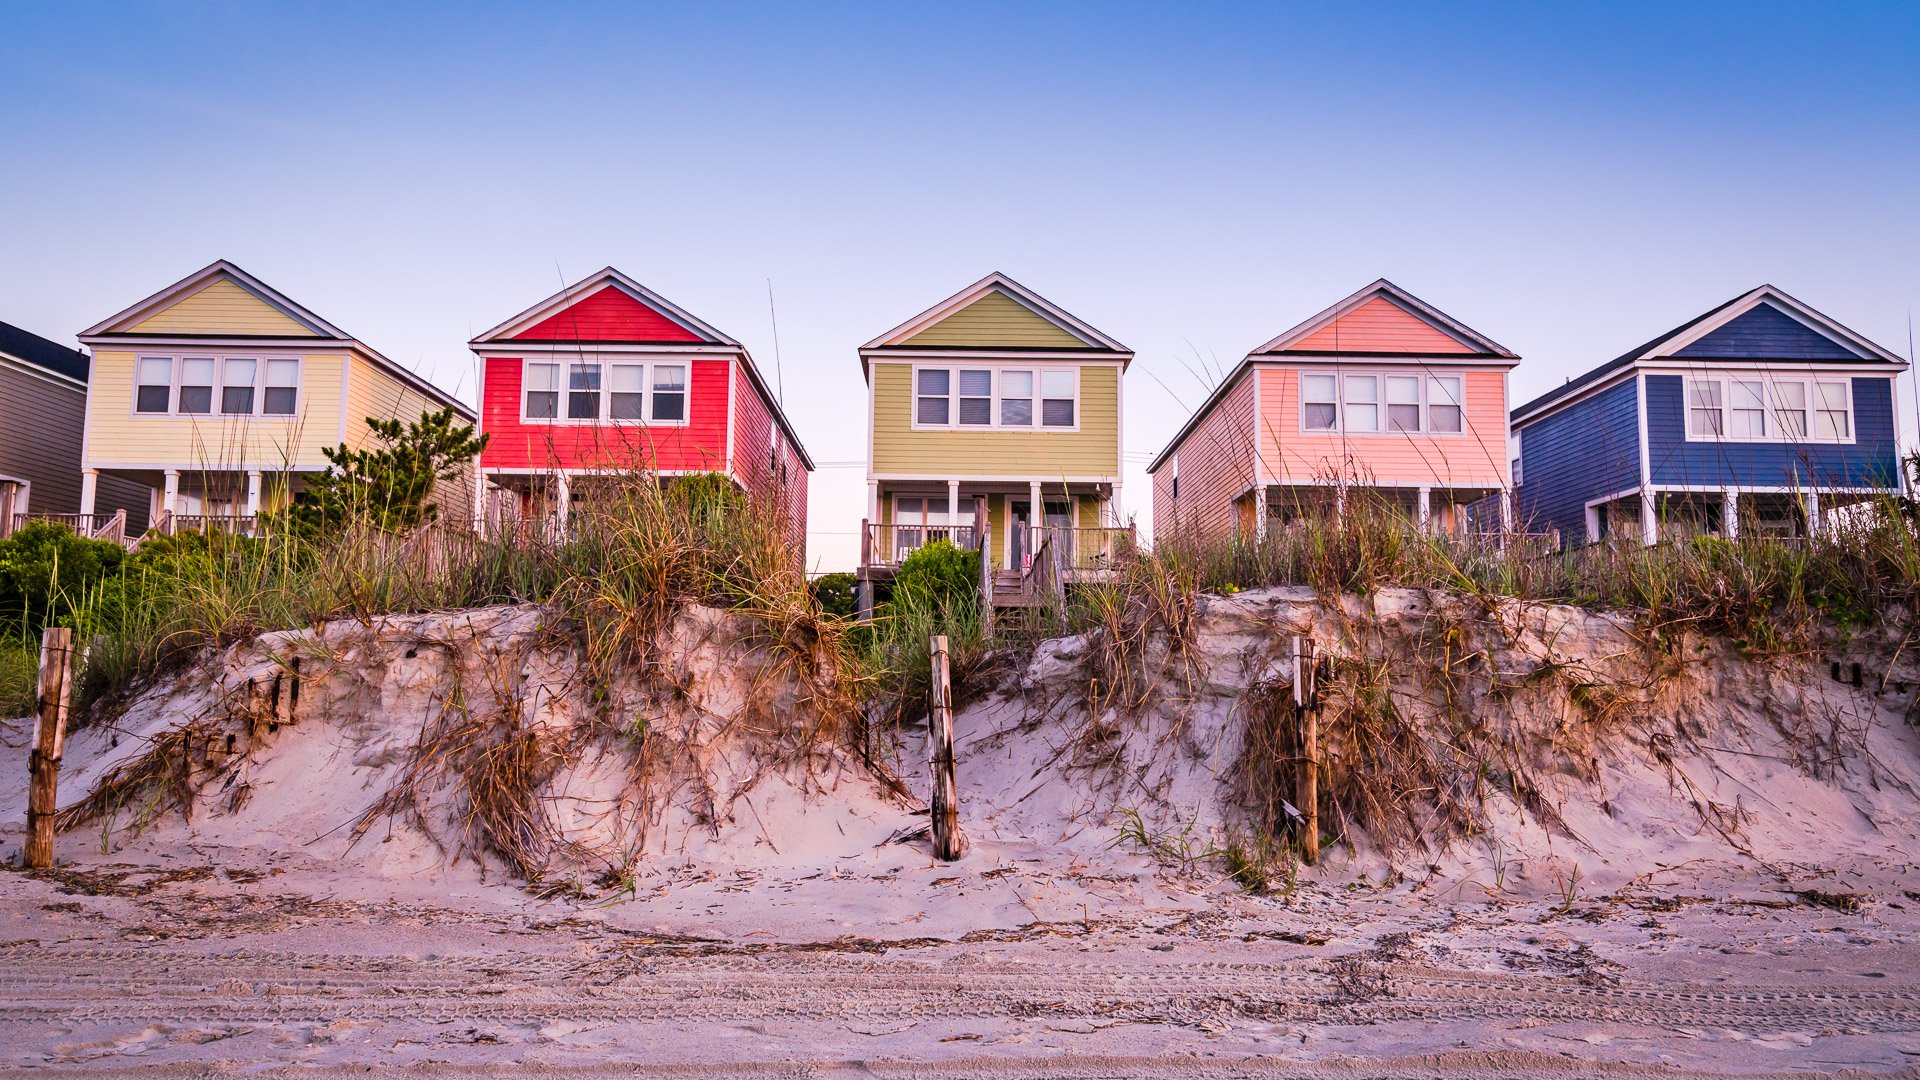 Why Nobody Is Buying Vacation Homes Anymore